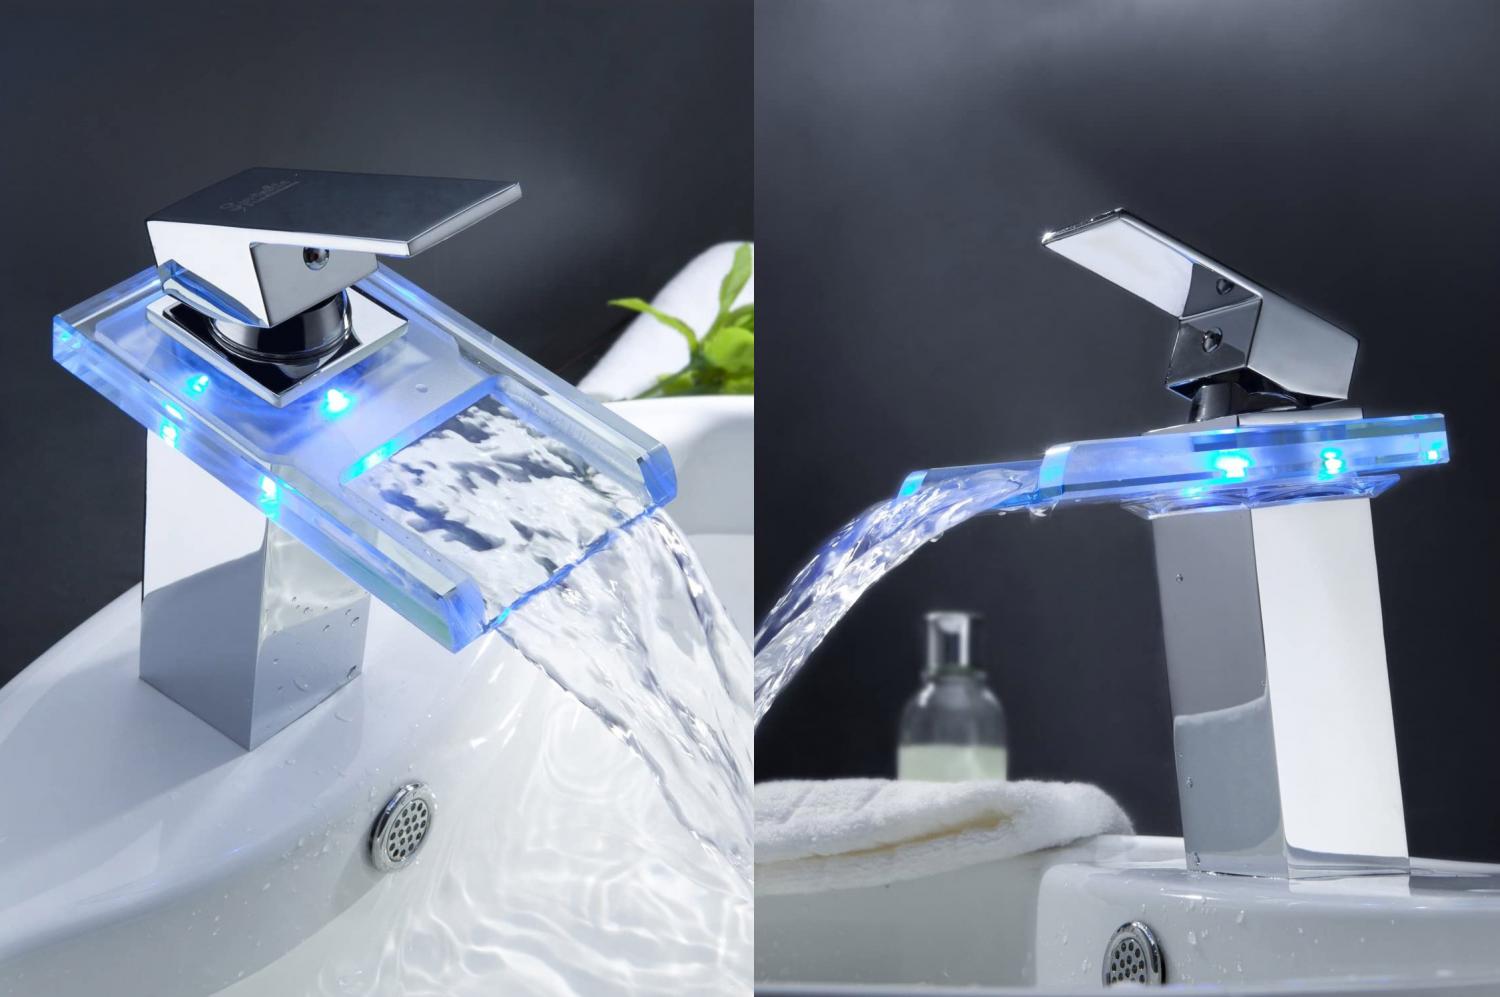 LED Bath Faucet Shows You If The Water is Hot, Cold, or Lukewarm - Color changing LED waterfall faucet